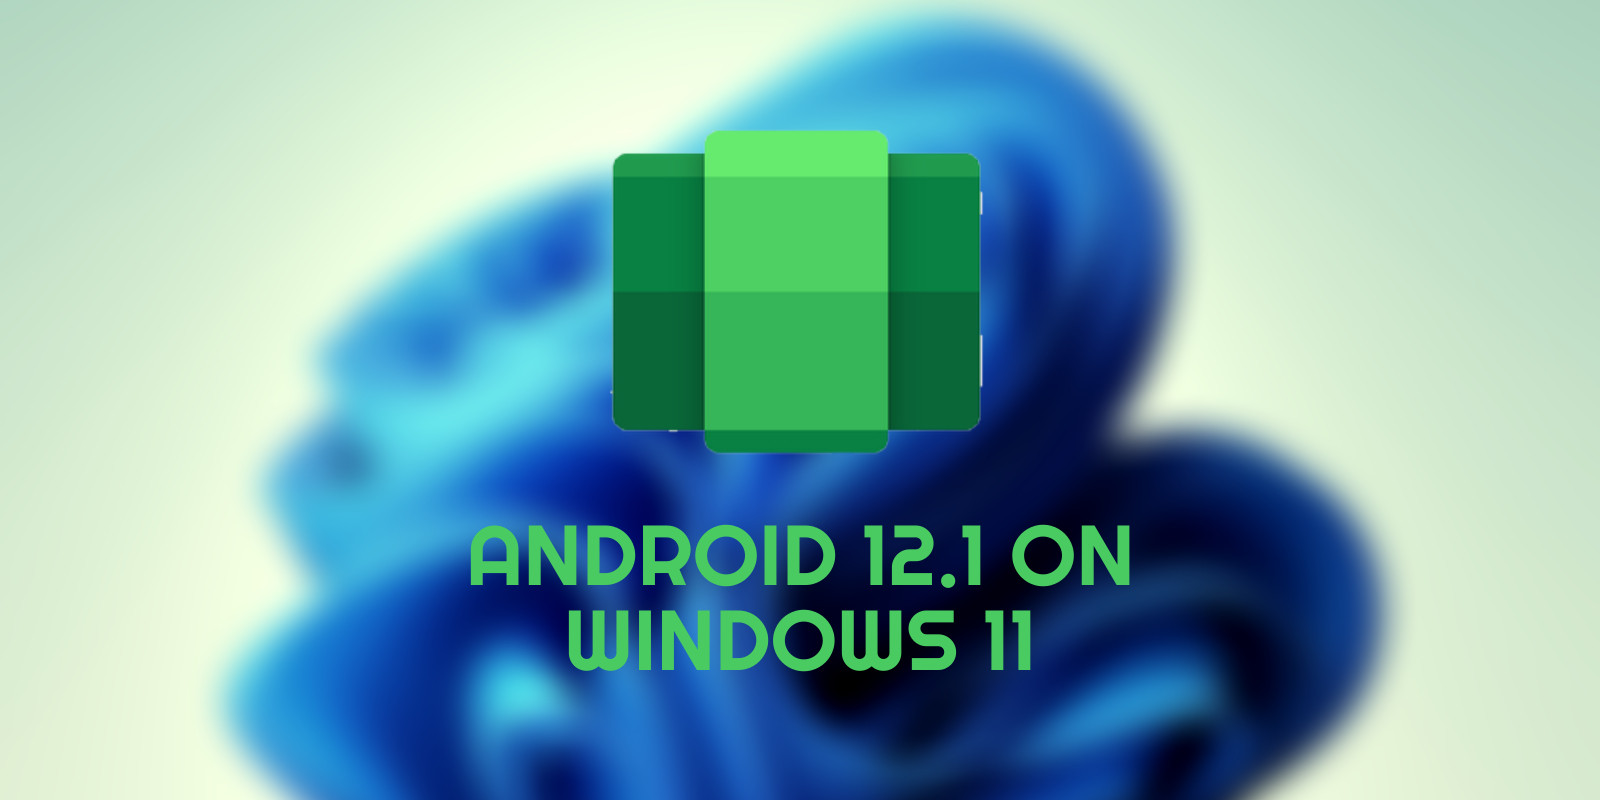 Windows Subsystem for Android 12.1 WSA for Windows 11